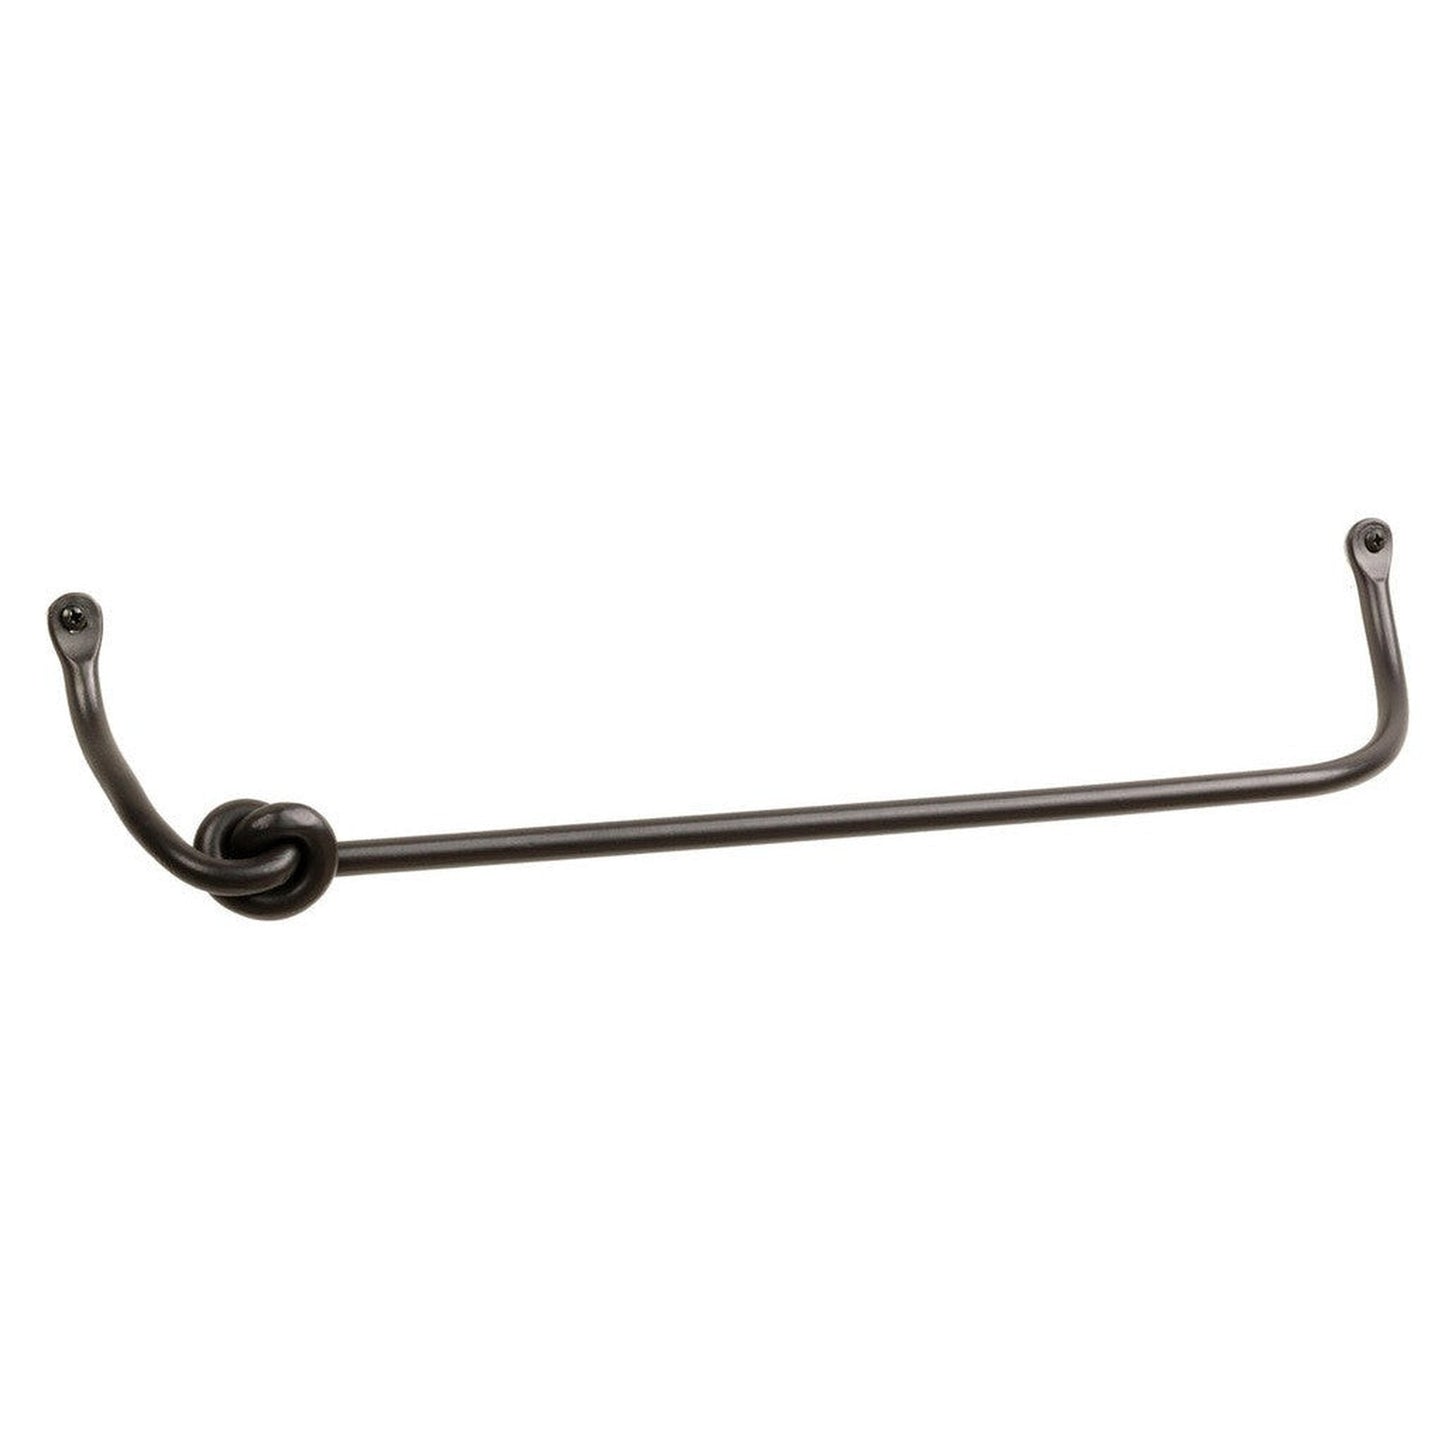 Stone County Ironworks Knot 24" Woodland Brown Iron Towel Bar